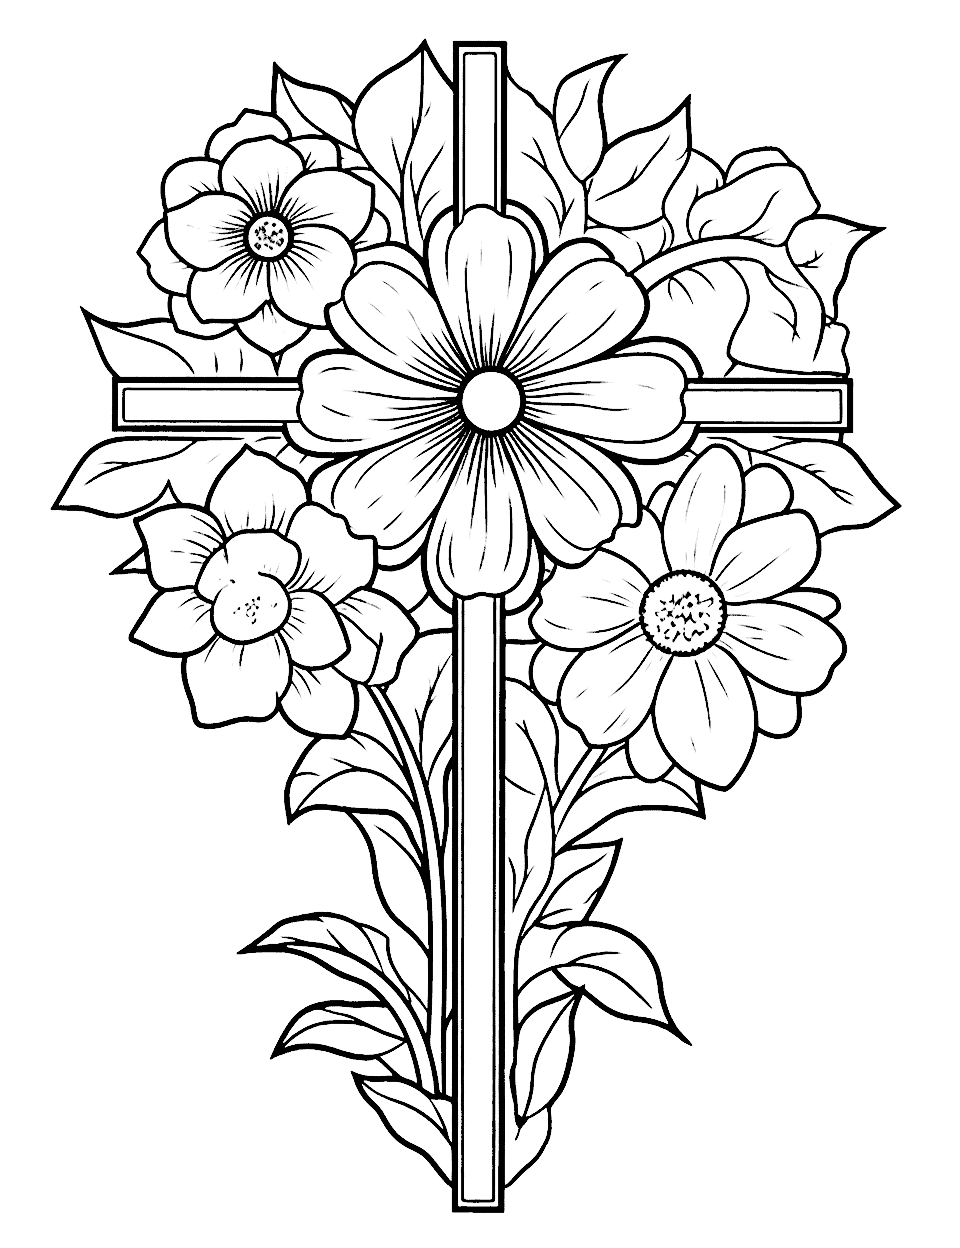 Floral Cross Easter Coloring Page - A cross adorned with intricate floral patterns and blossoming flowers symbolizing the connection between Easter and the beauty of nature.